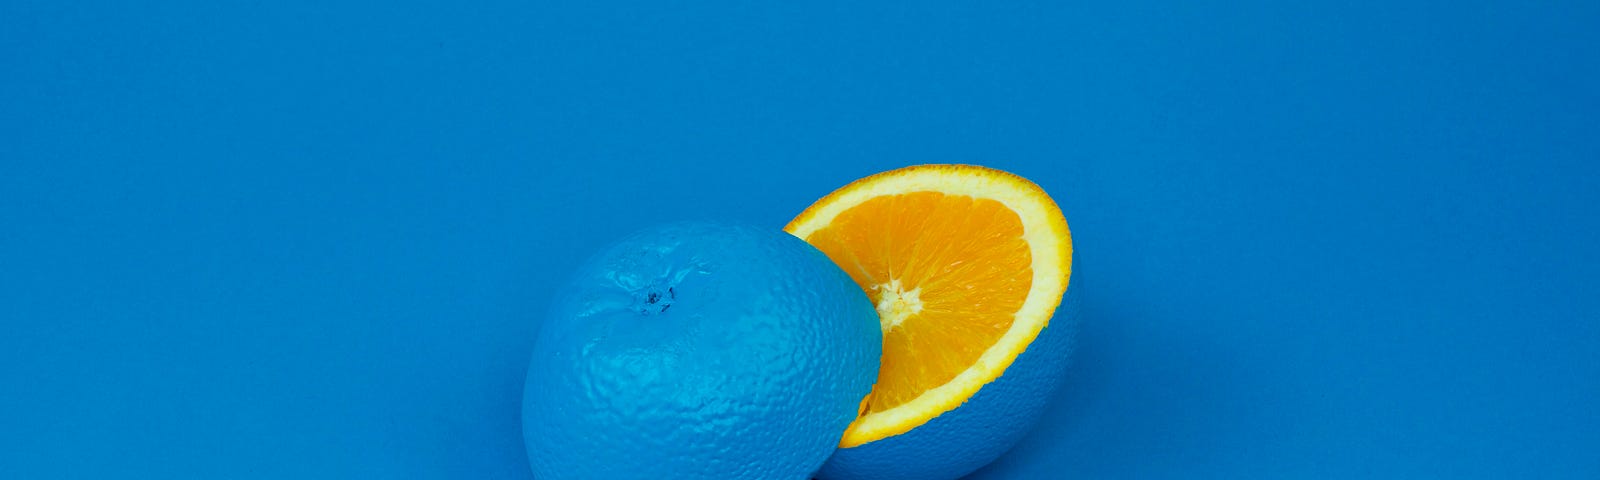 An orange with the outside painted blue to match the blue background. It’s cut in half so you see the inside orange.